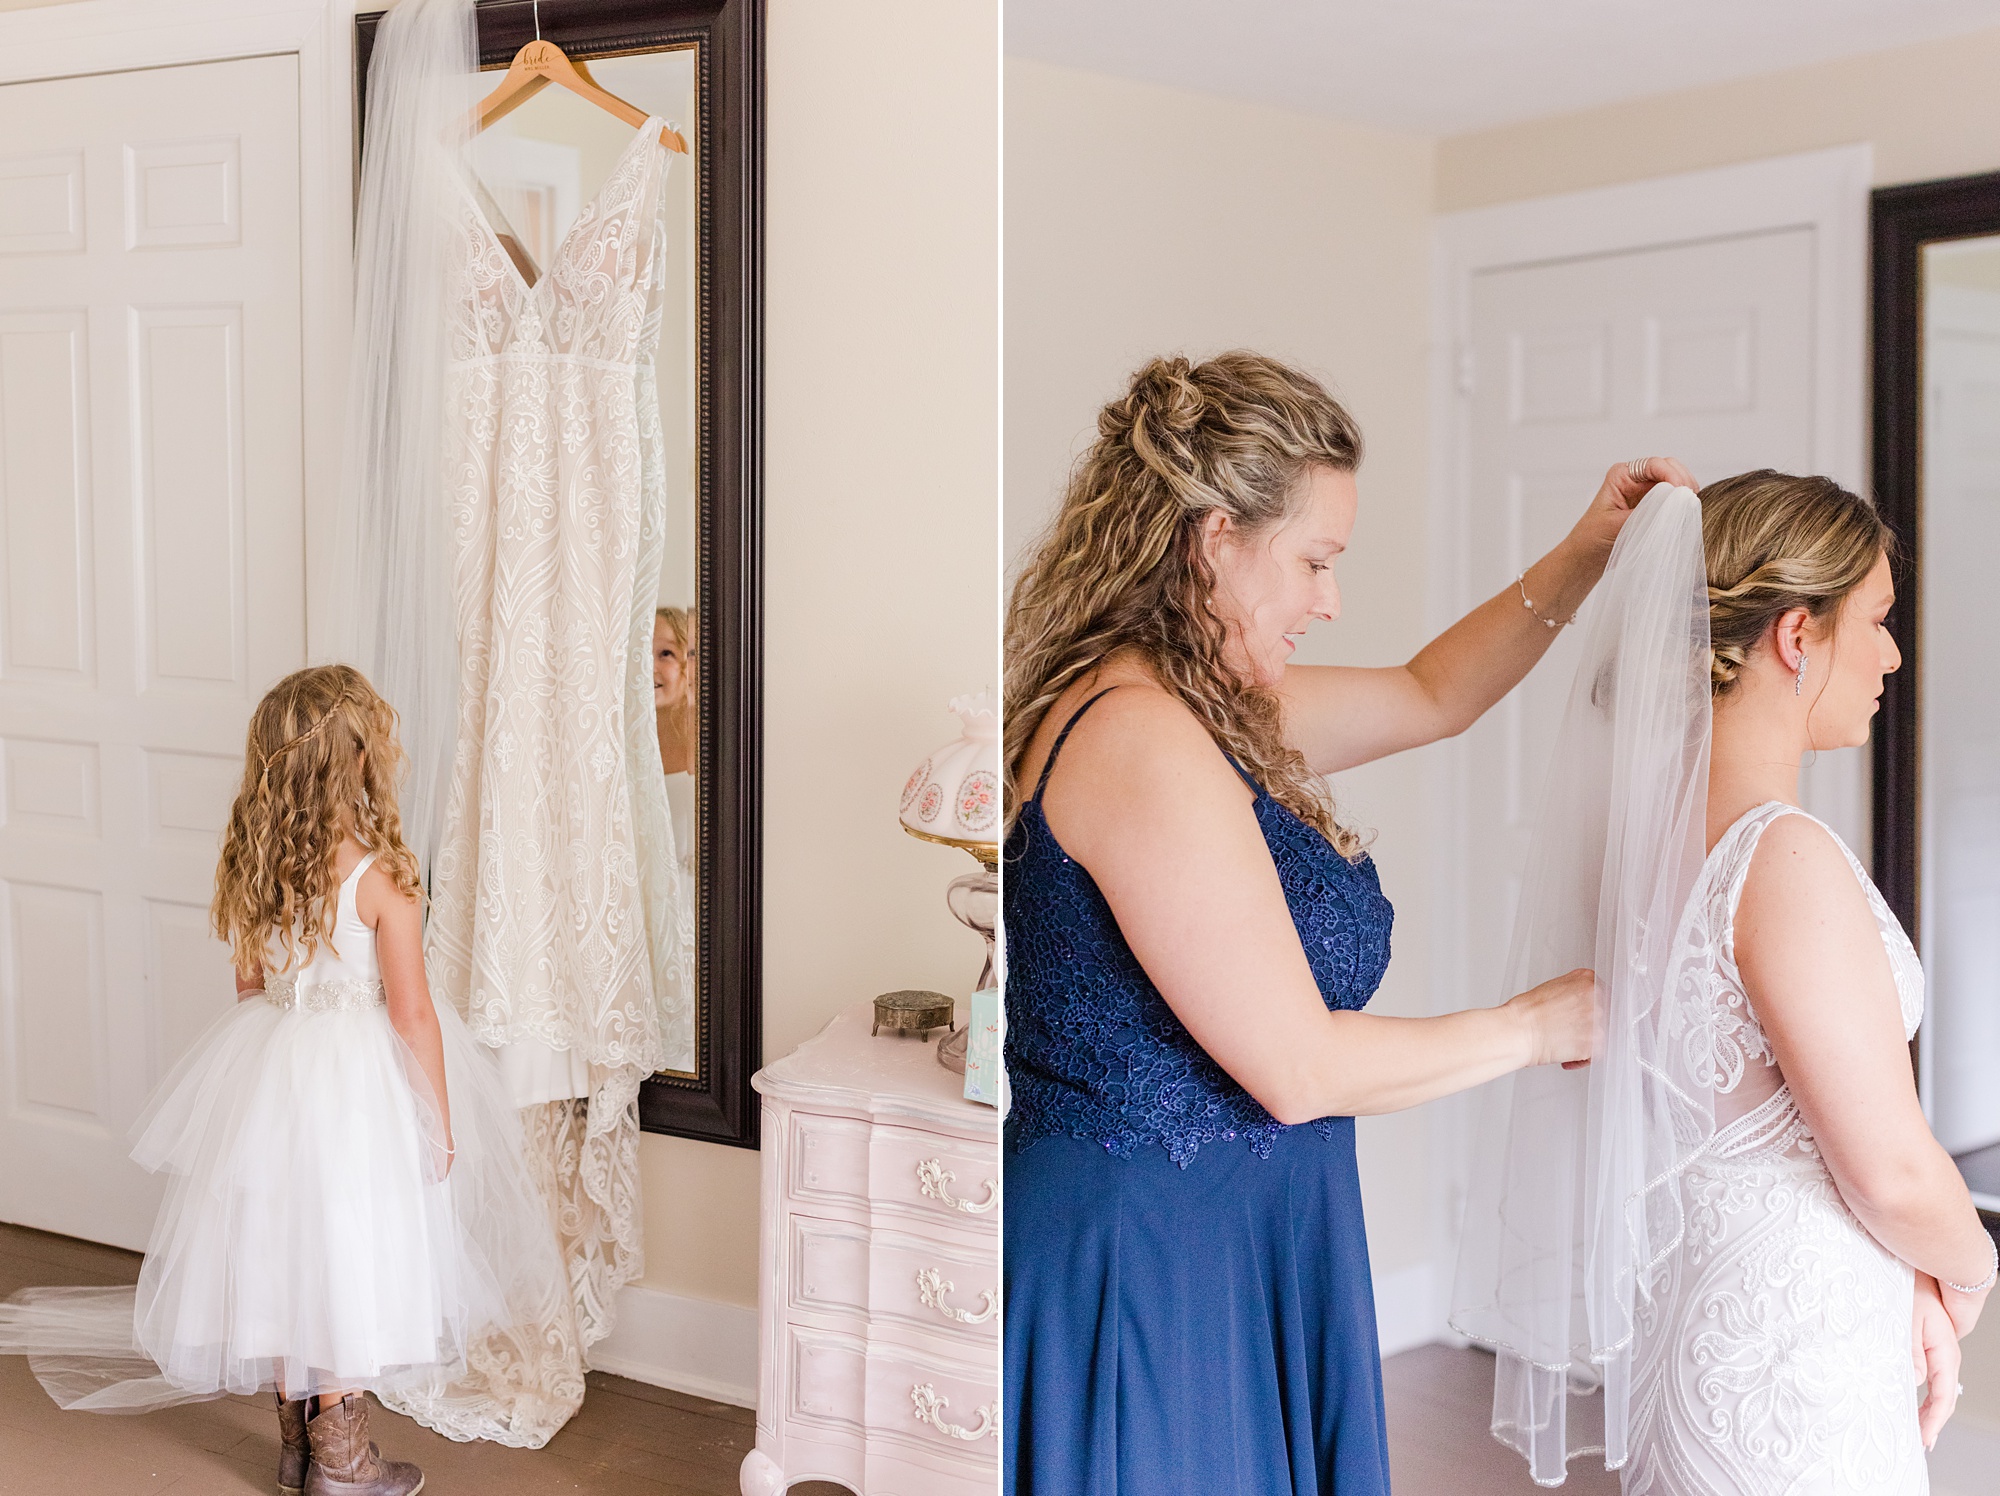 daughter looks at mother's wedding gown before Historic Shady Lane wedding